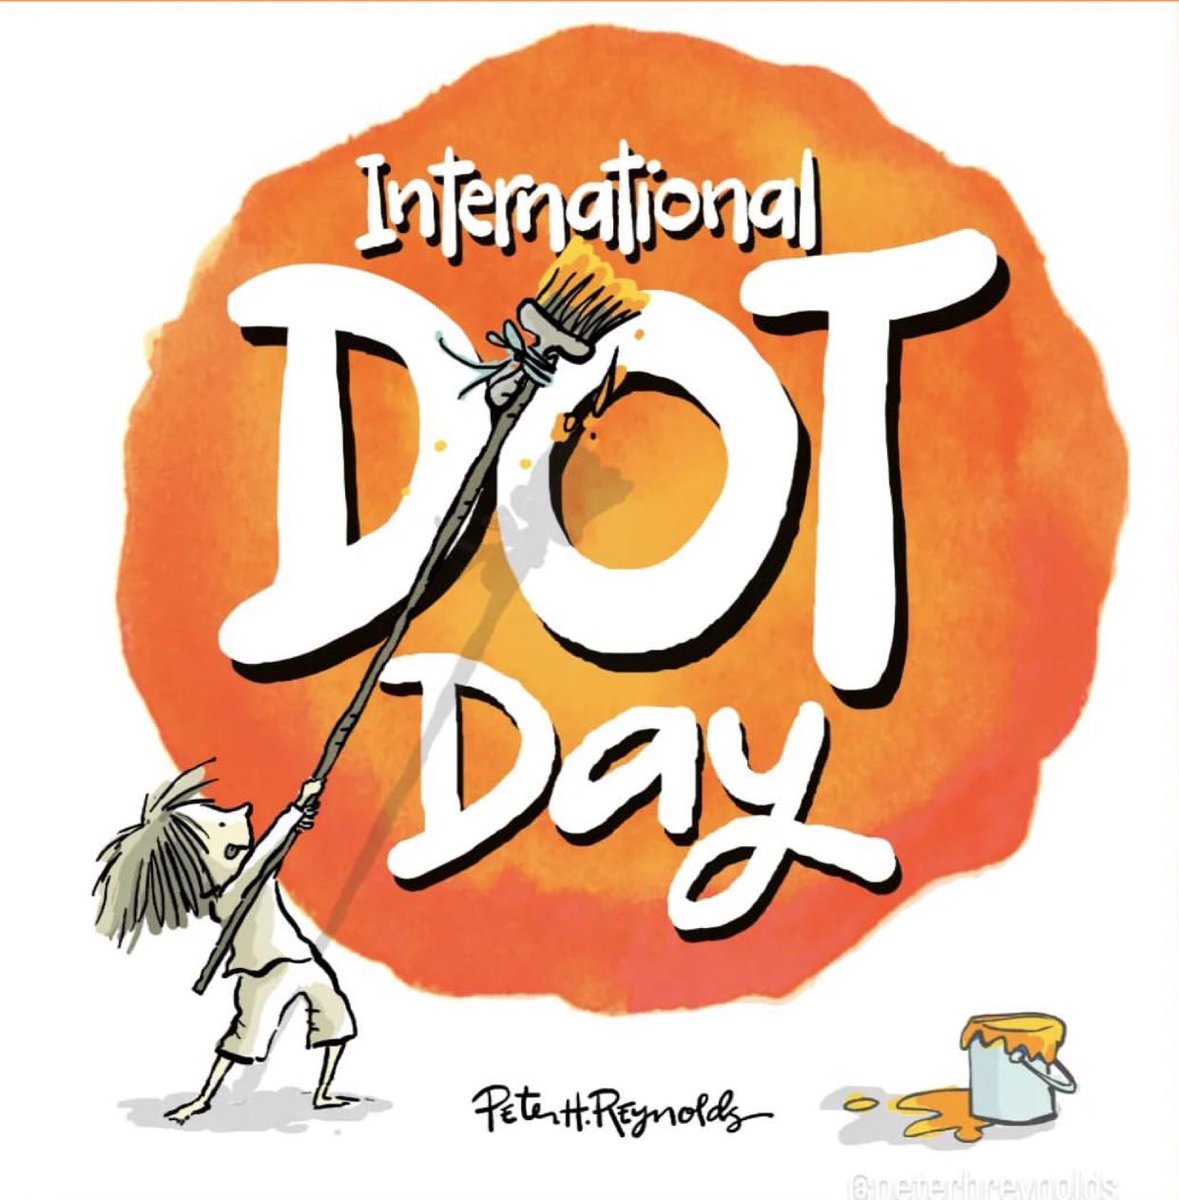 Happy International Dot Day!! #DotDay 2023 is here!! @DotClubConnect 190 countries celebrating! Let me know where you are celebrating! #creativity #courage #kindness #impact ❤️💕